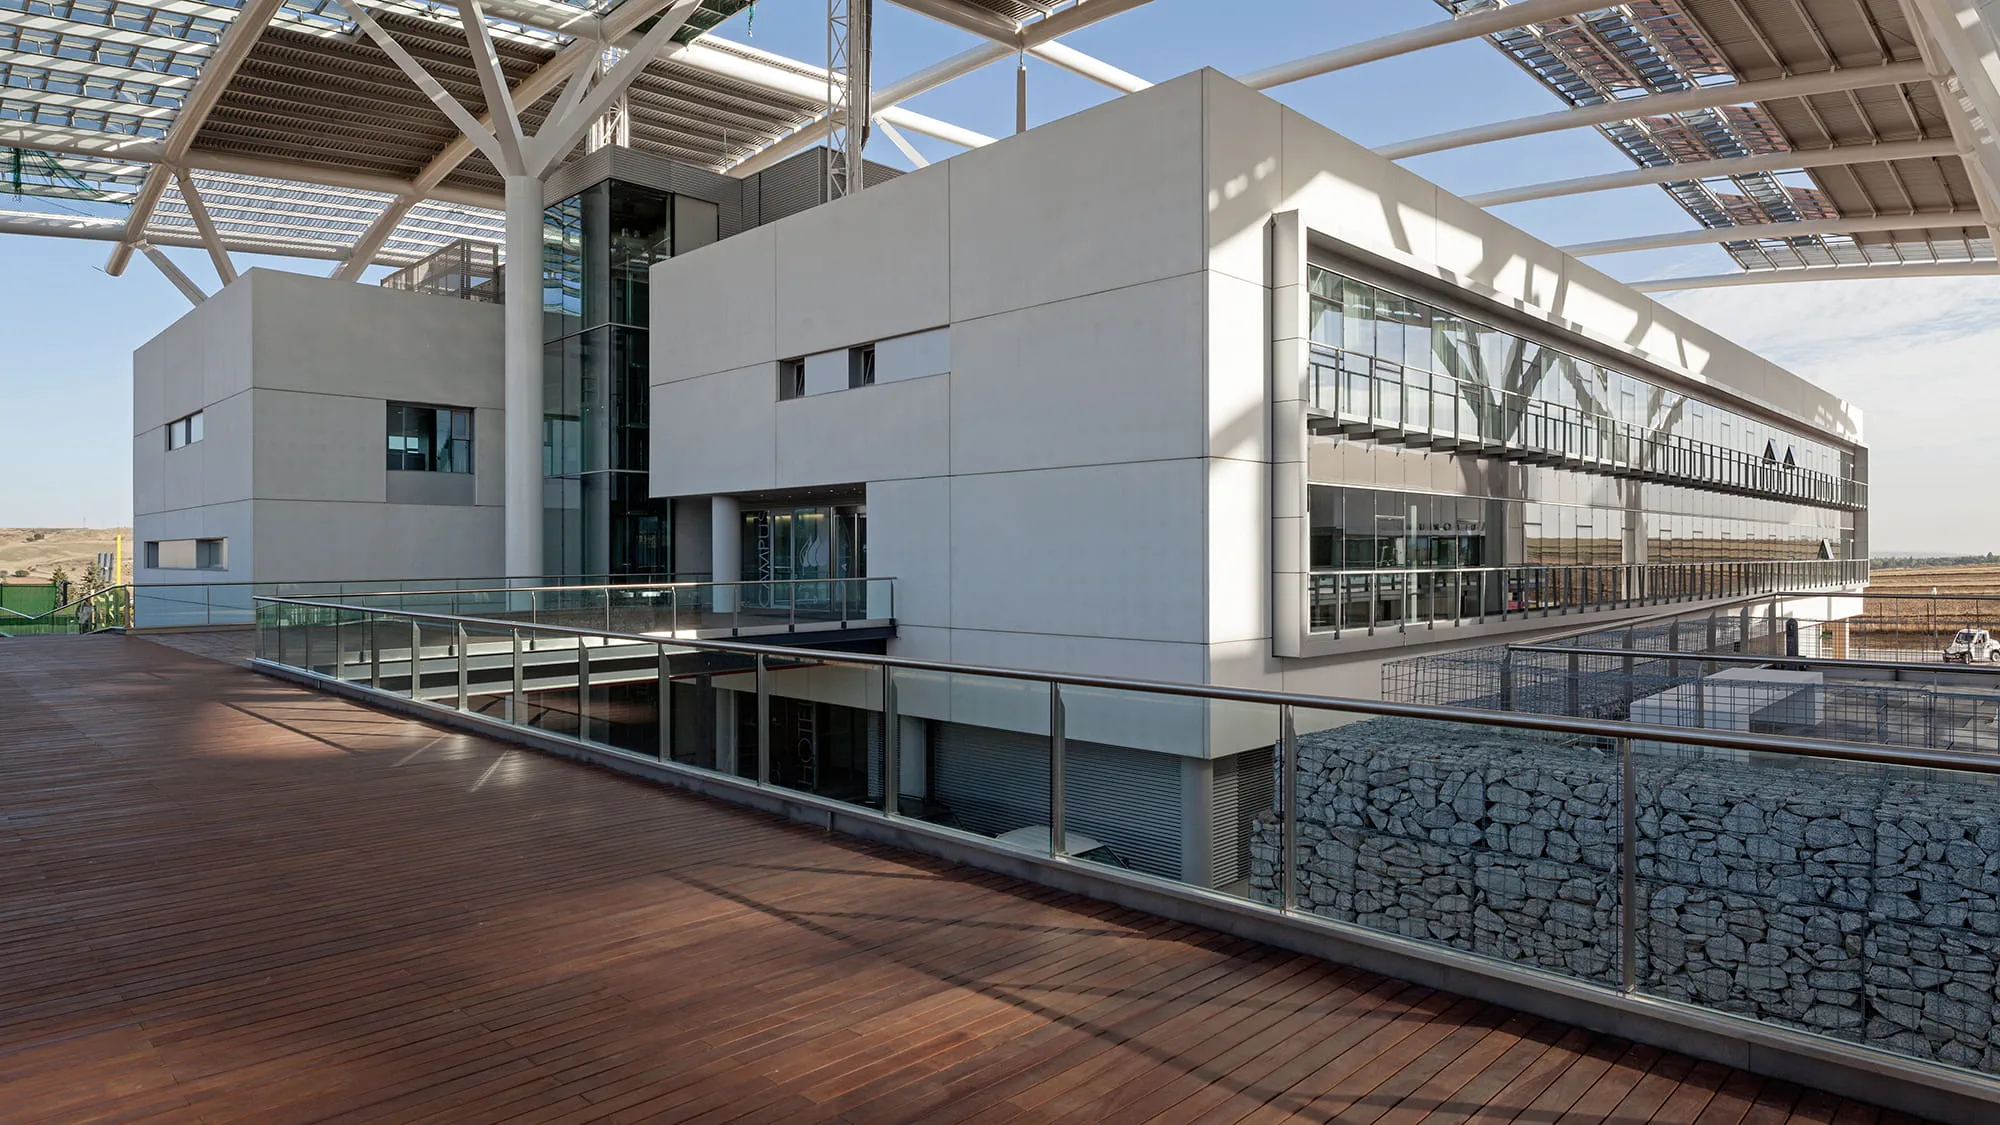 Interior view of the campus. Credit: Arup; ABAA; VOARQ